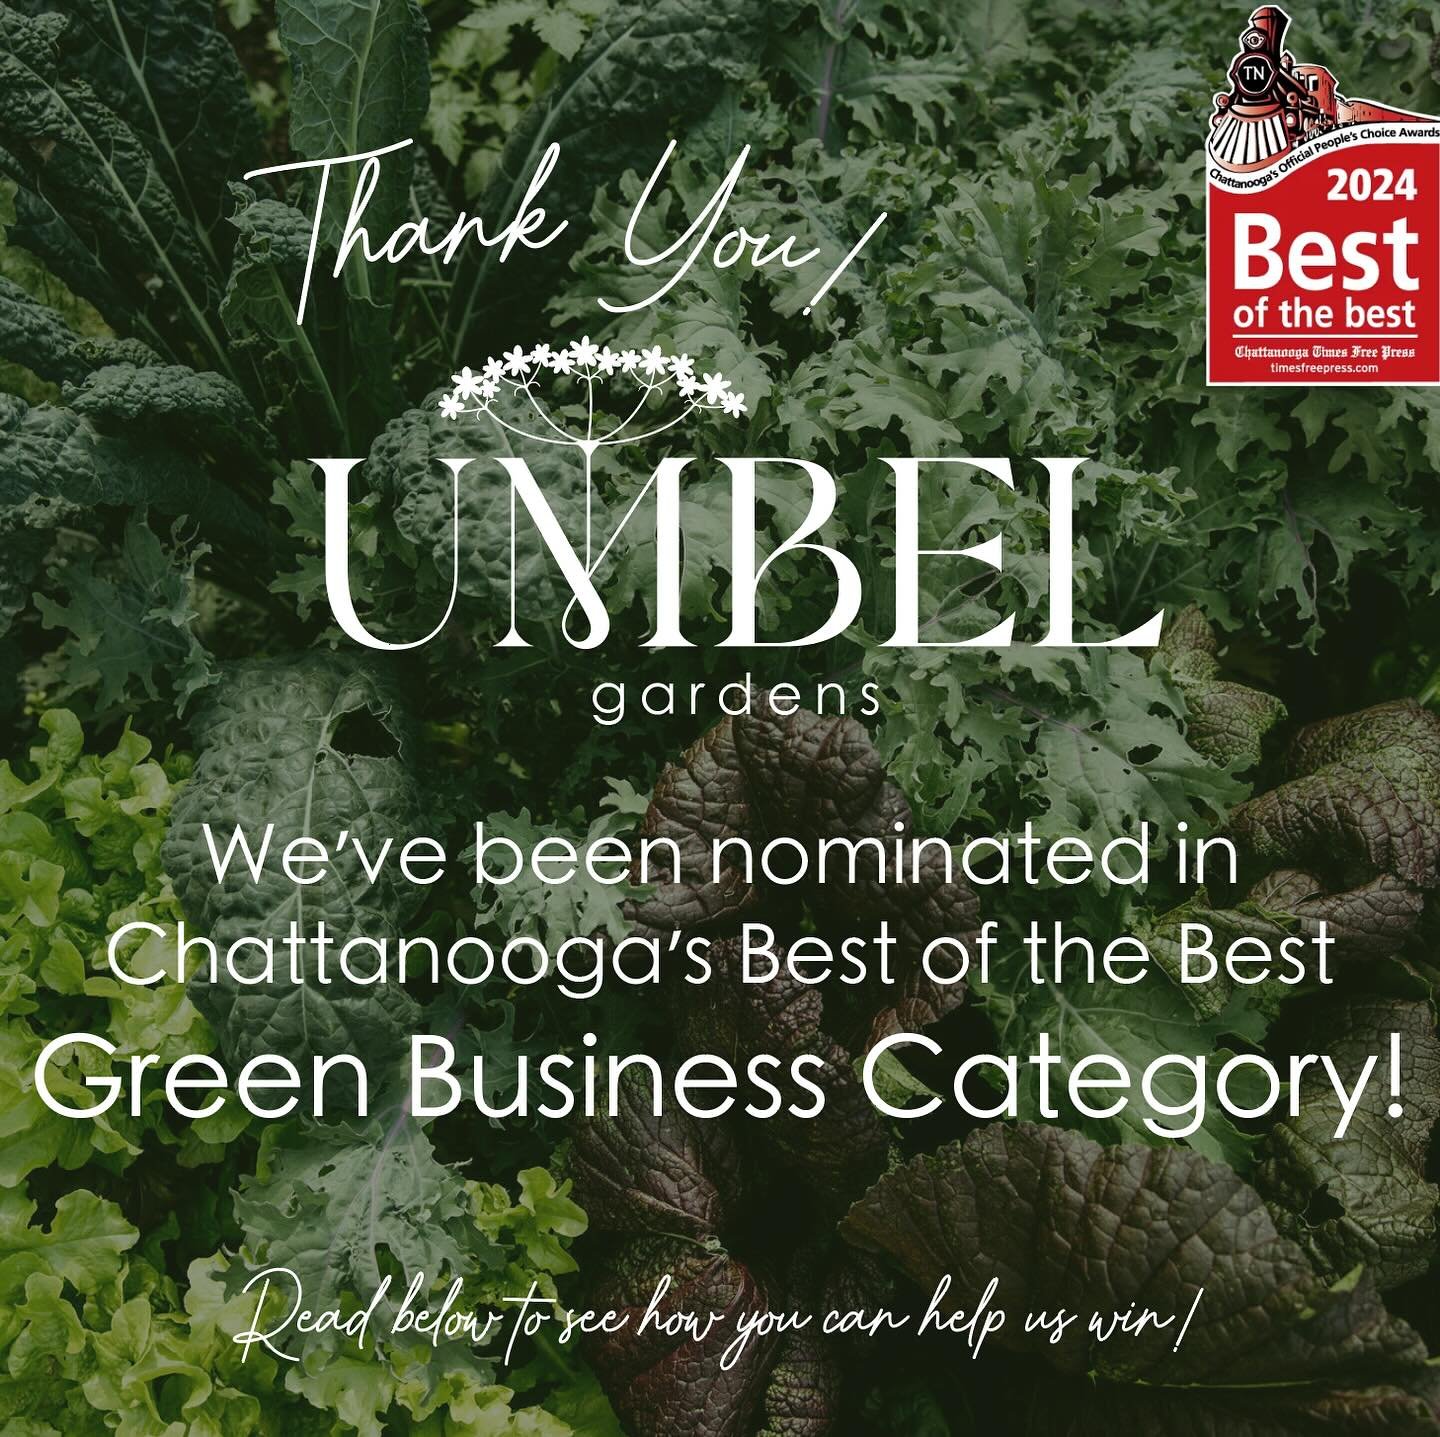 Thank you to everyone who nominated us for Chattanooga&rsquo;s Best of the Best! Because of you, we made it in the top 5 businesses in the &ldquo;Green Business or Organization&rdquo; category! 💚
There are many incredible businesses and organization